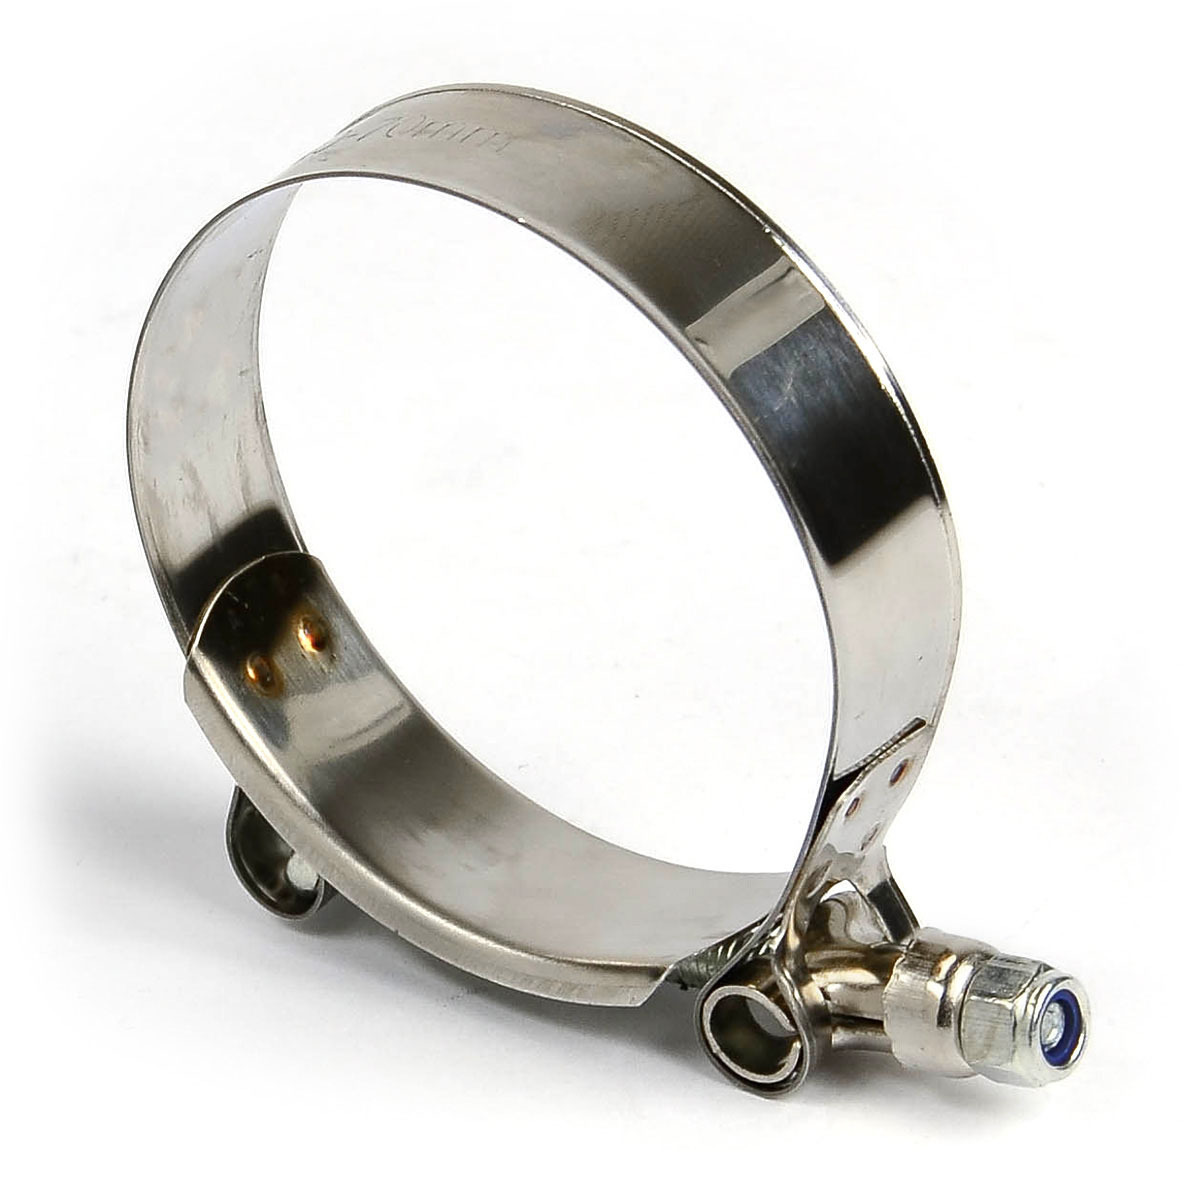 T-Bolt Hose Clamps & Rings - Stainless Steel Hose Clamp Fittings